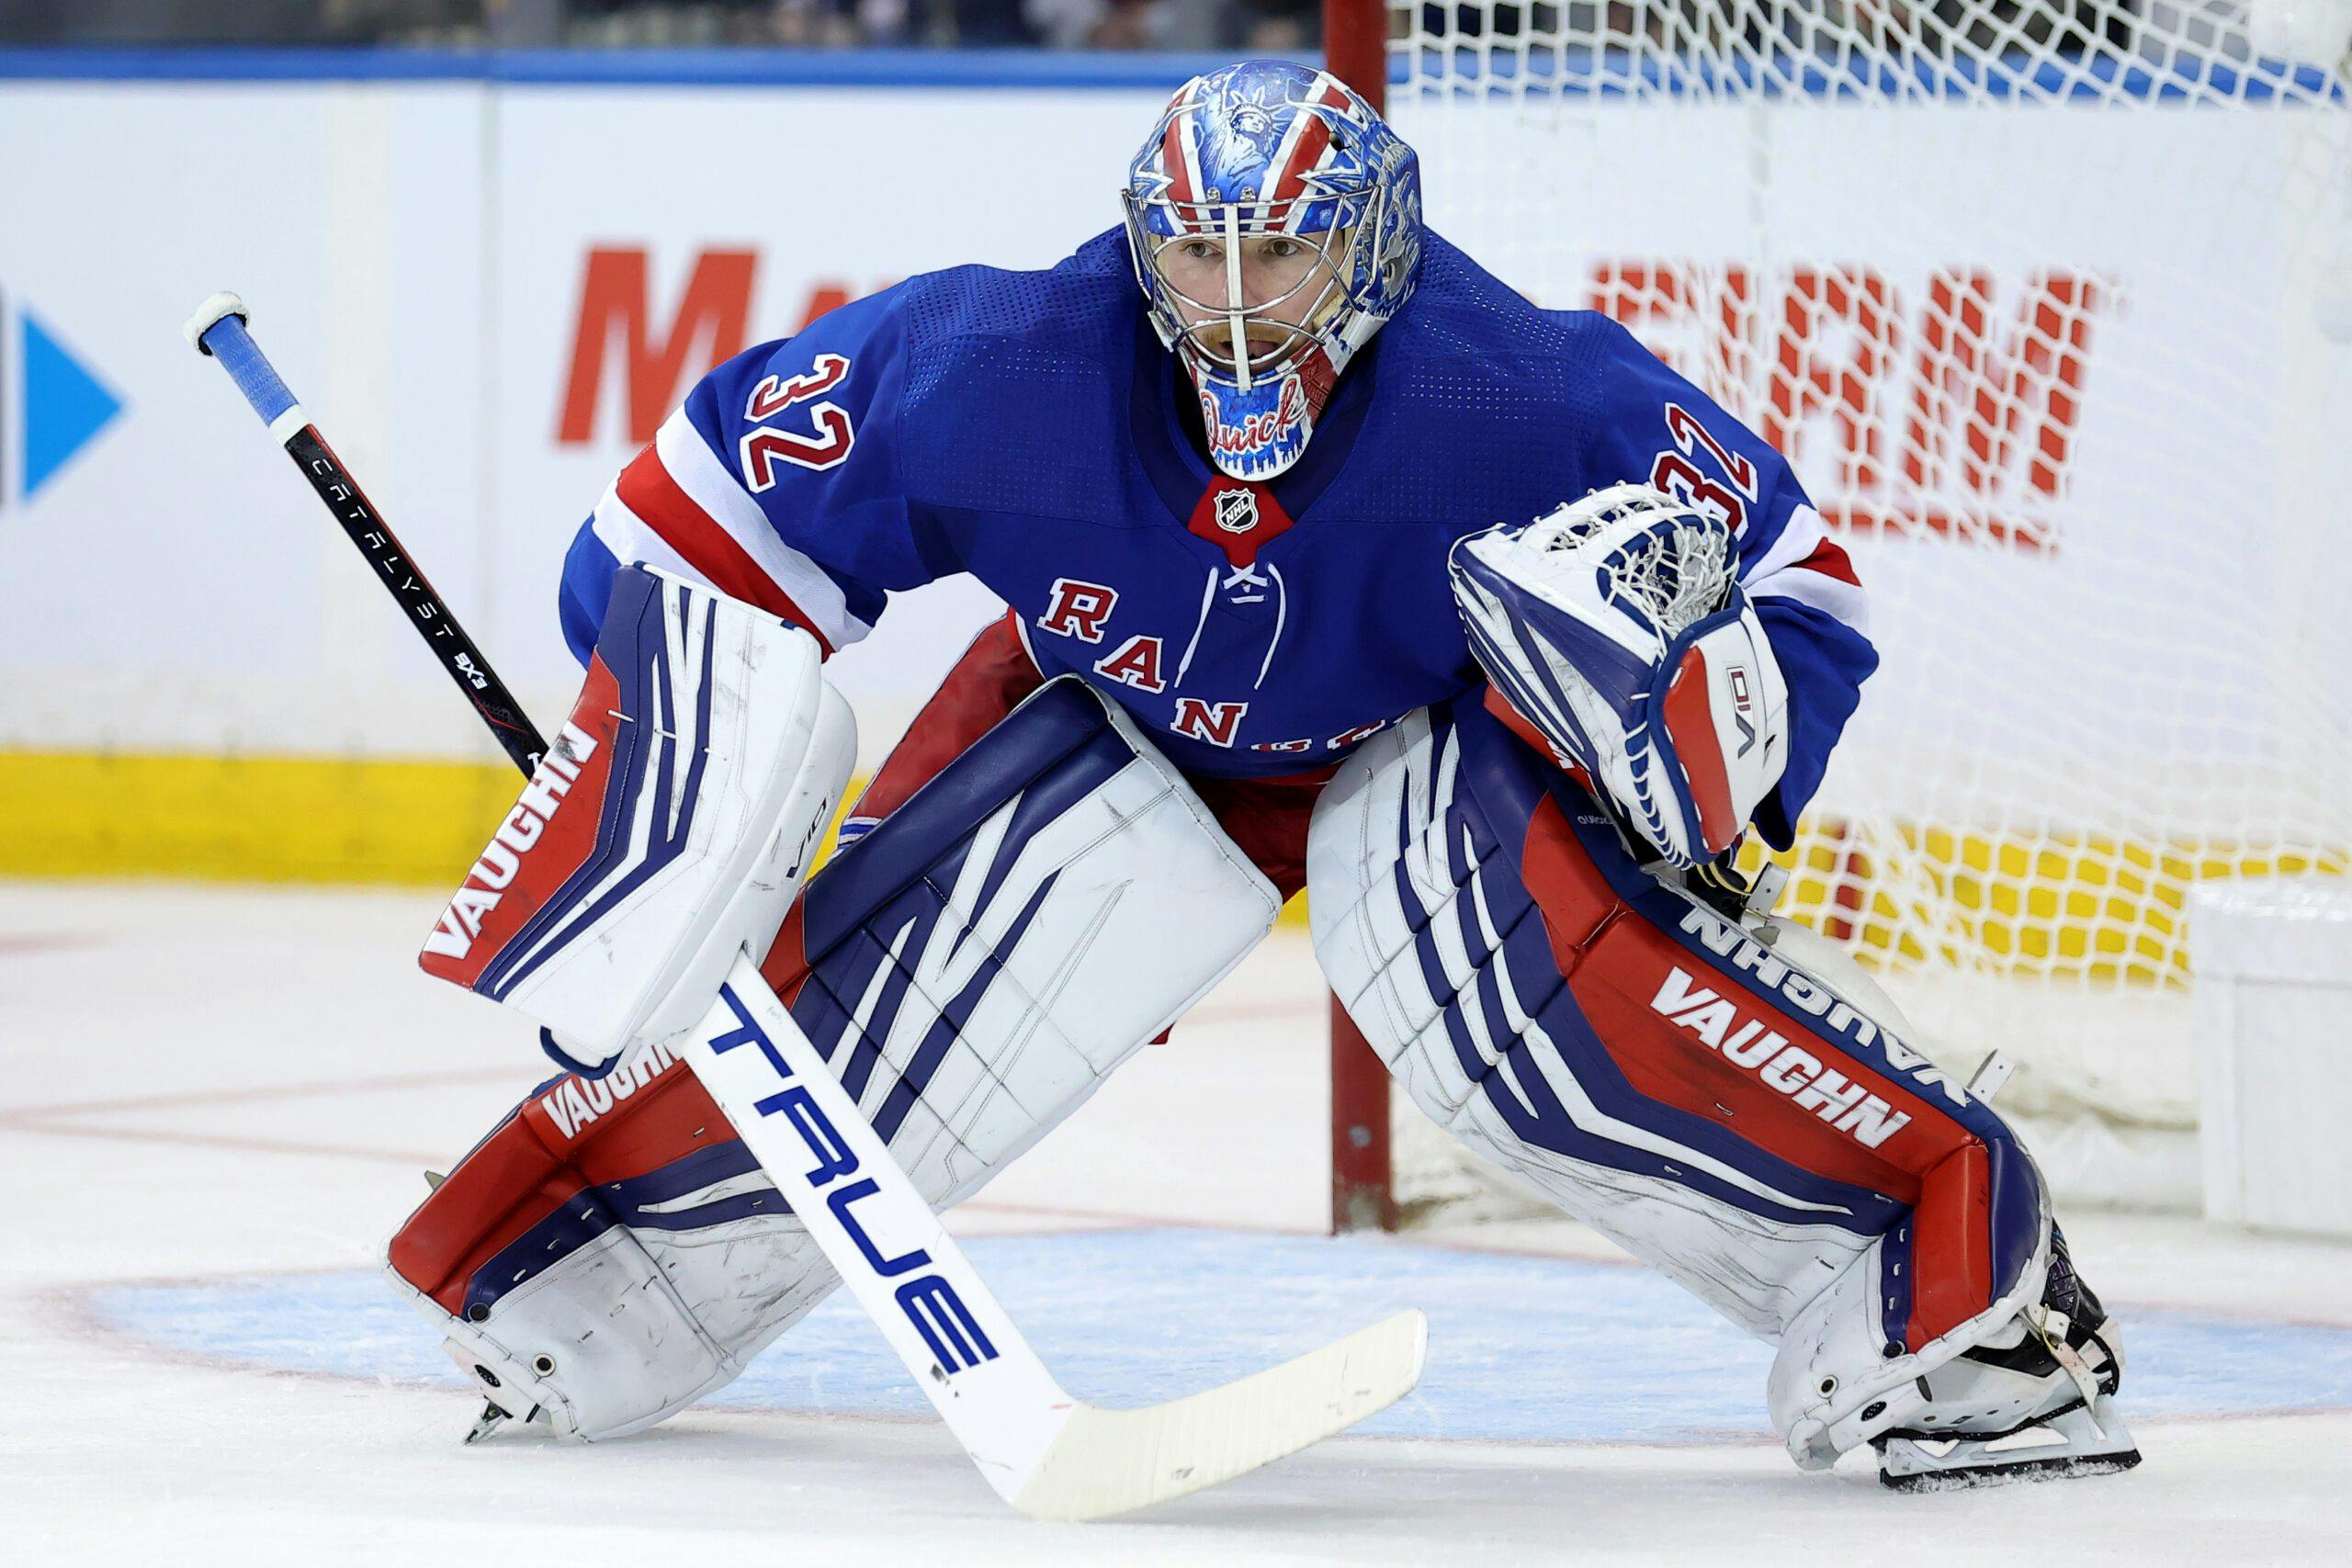 The biggest concerns surrounding the New York Rangers